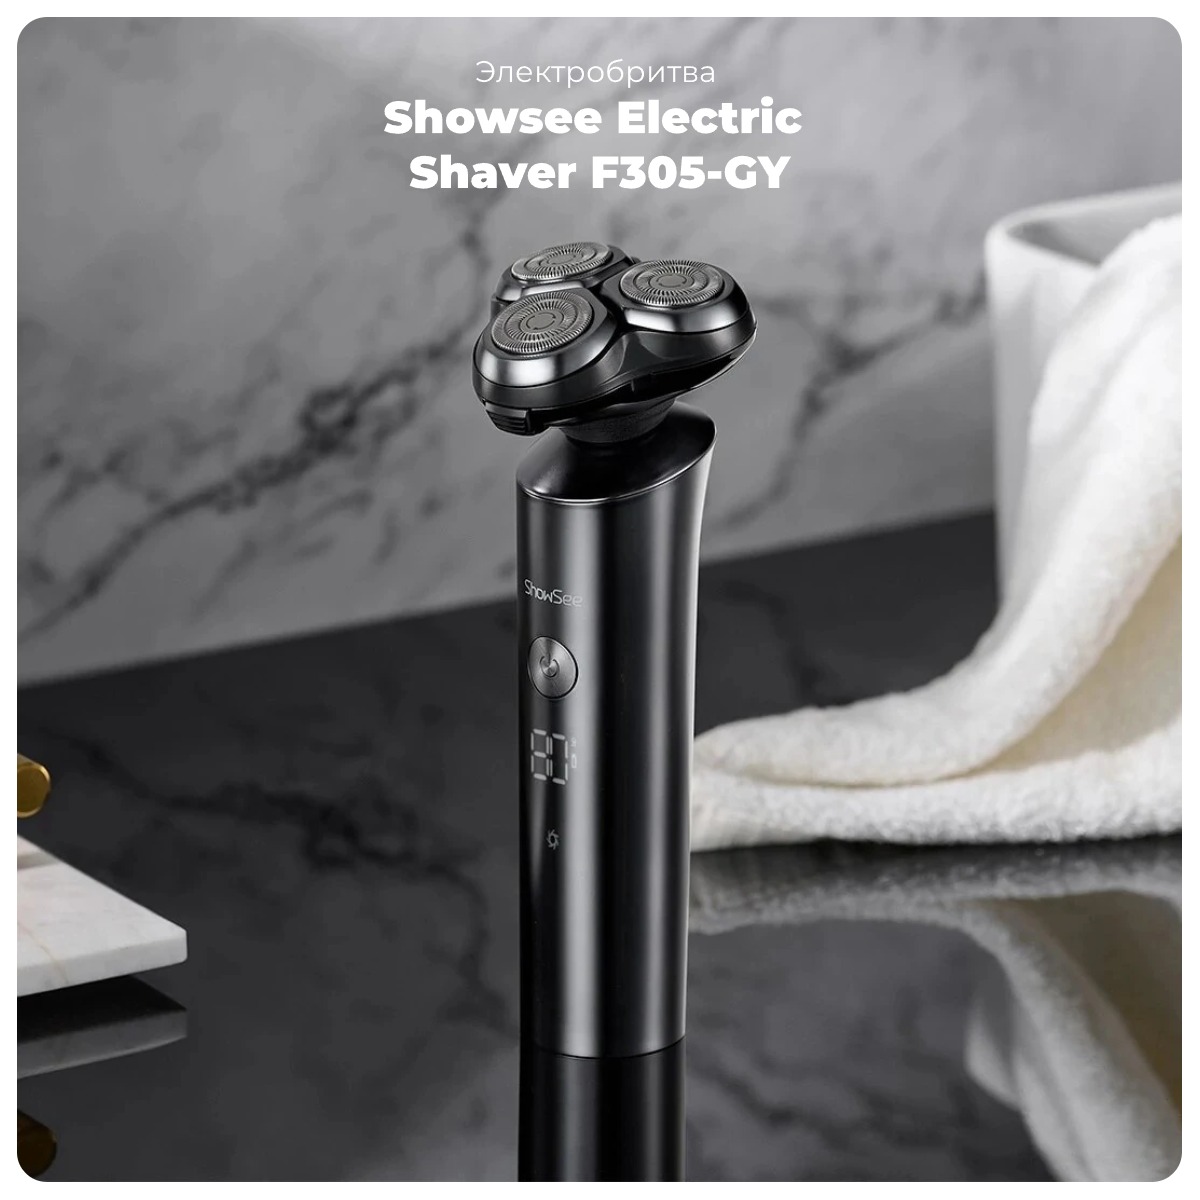 Showsee-Electric-Shaver-F305-GY-01